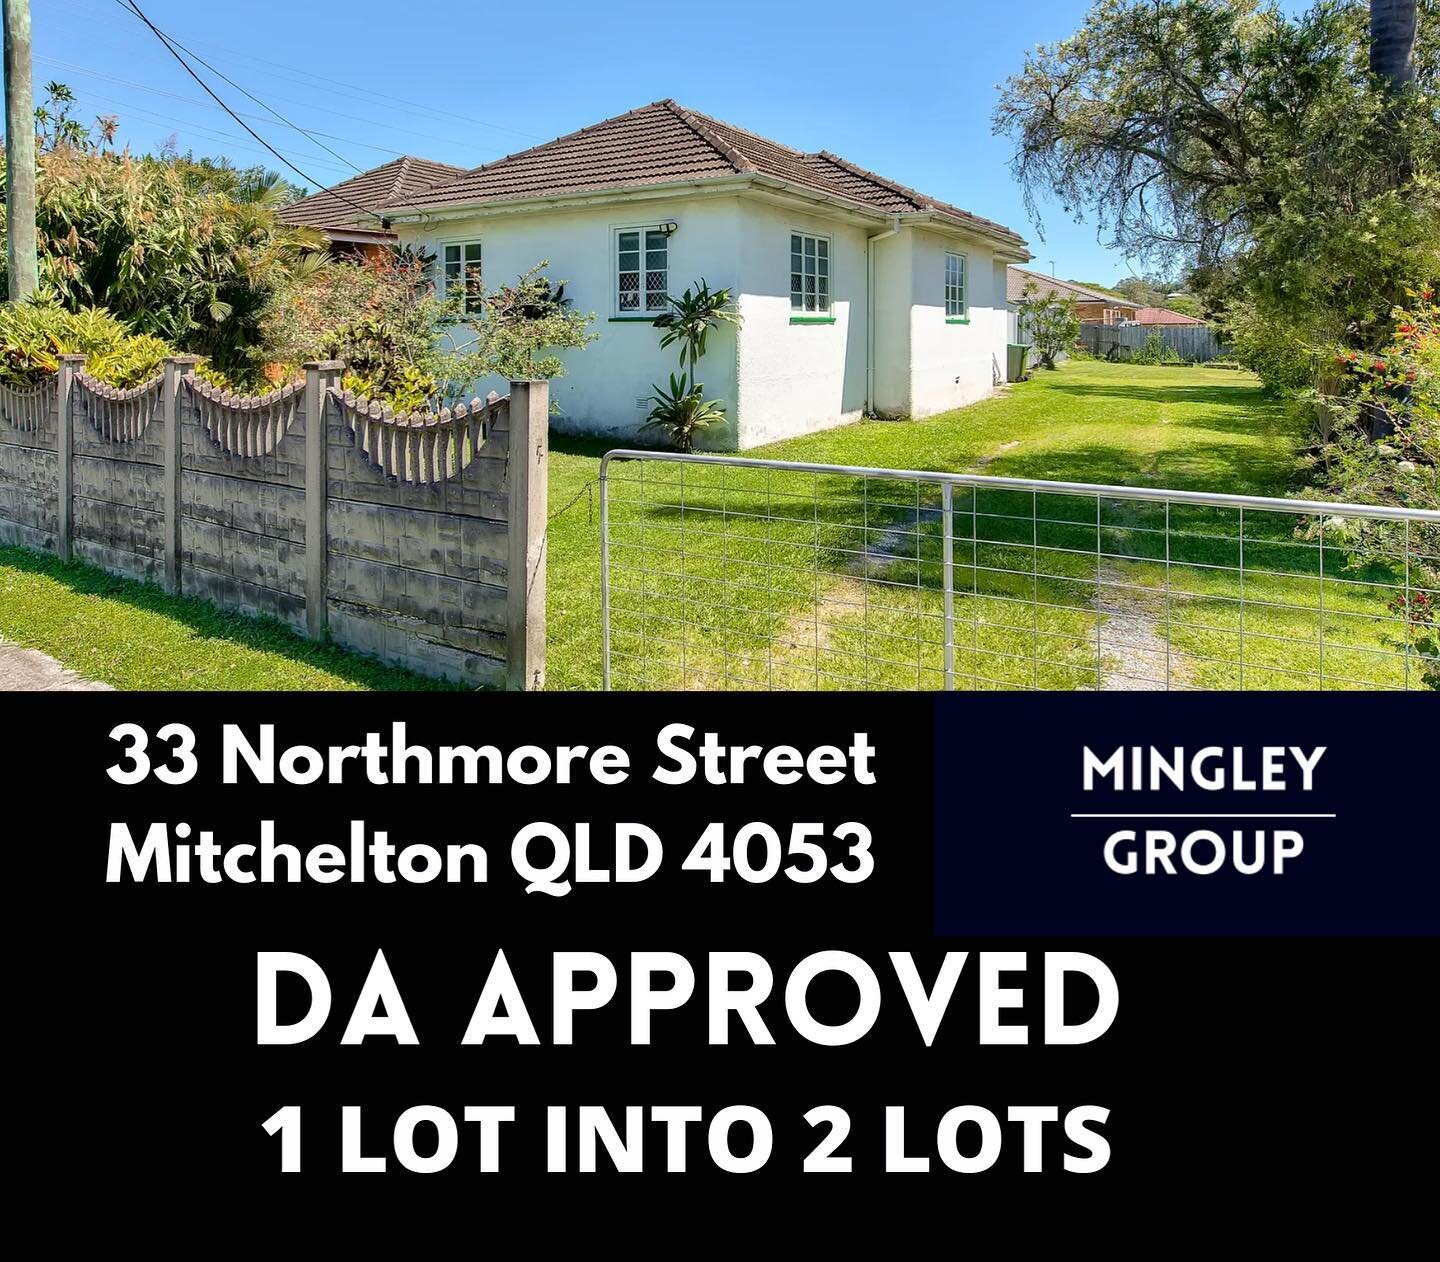 DA APPROVED - second approval in 2022 thanks to @jrey.au team! First Northside Project too and will be excited to see this beauty on the market 🔥#mingleygroup #brisbane #propertydevelopment #australia